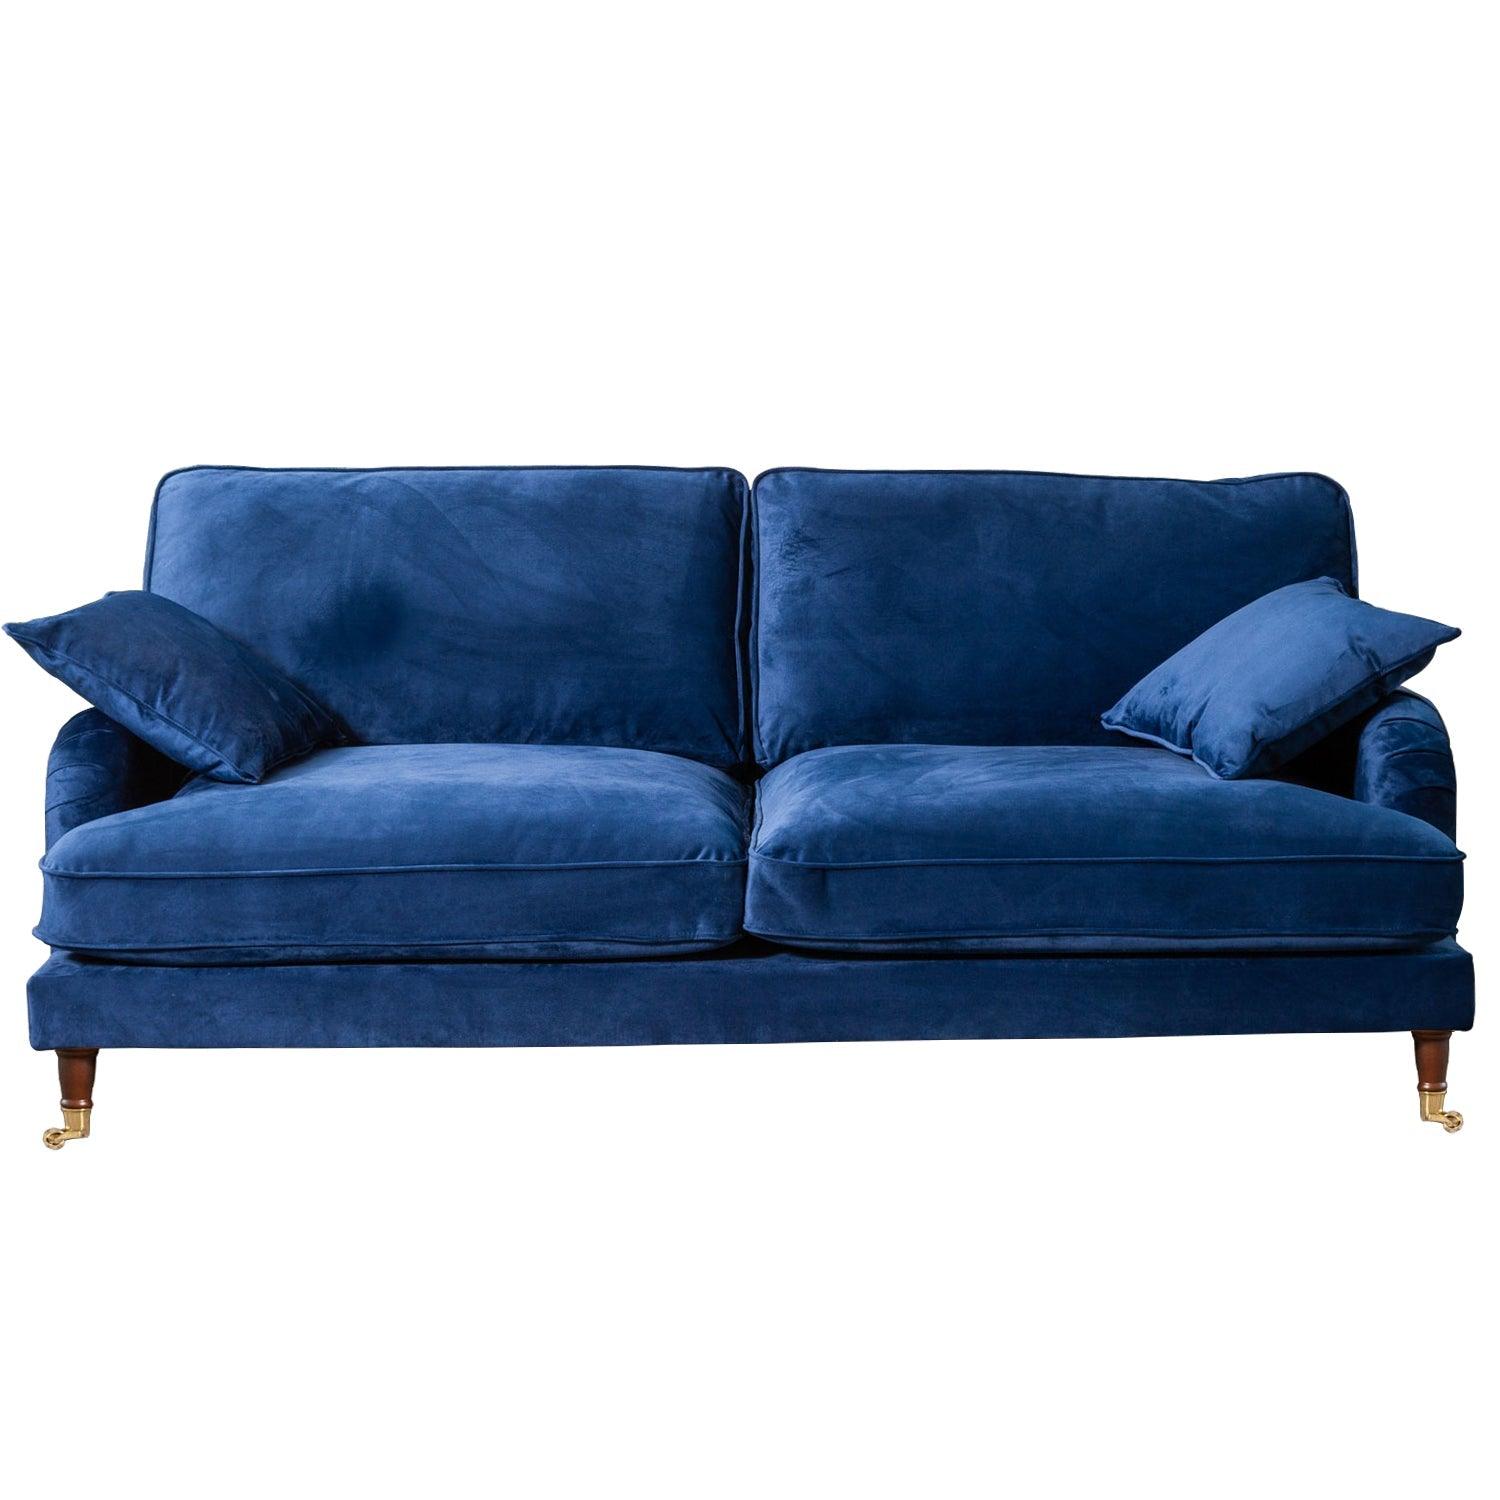 Rupert Modern Fabric Sofa Collection - loveyourbed.co.uk